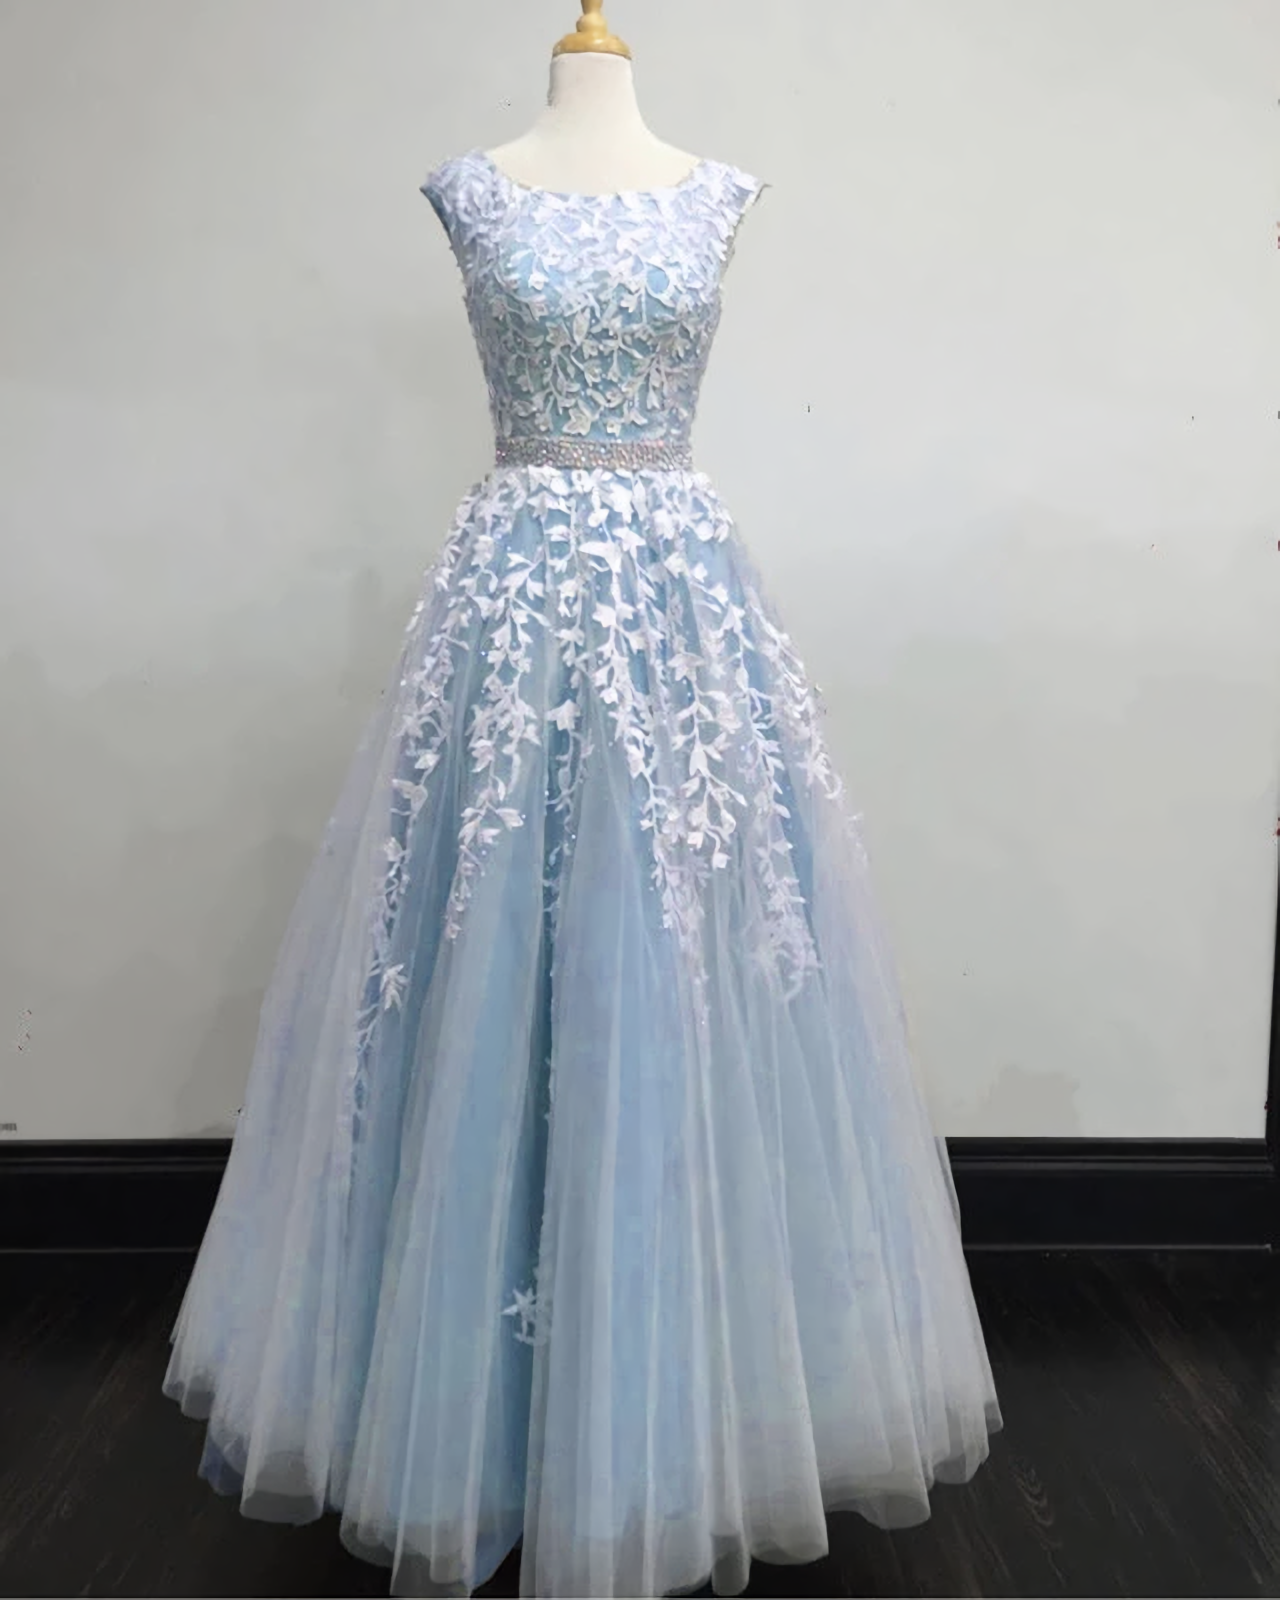 Dress Aesthetic, Modest Prom Dresses, Tulle Cap Sleeves Lace Embroidery